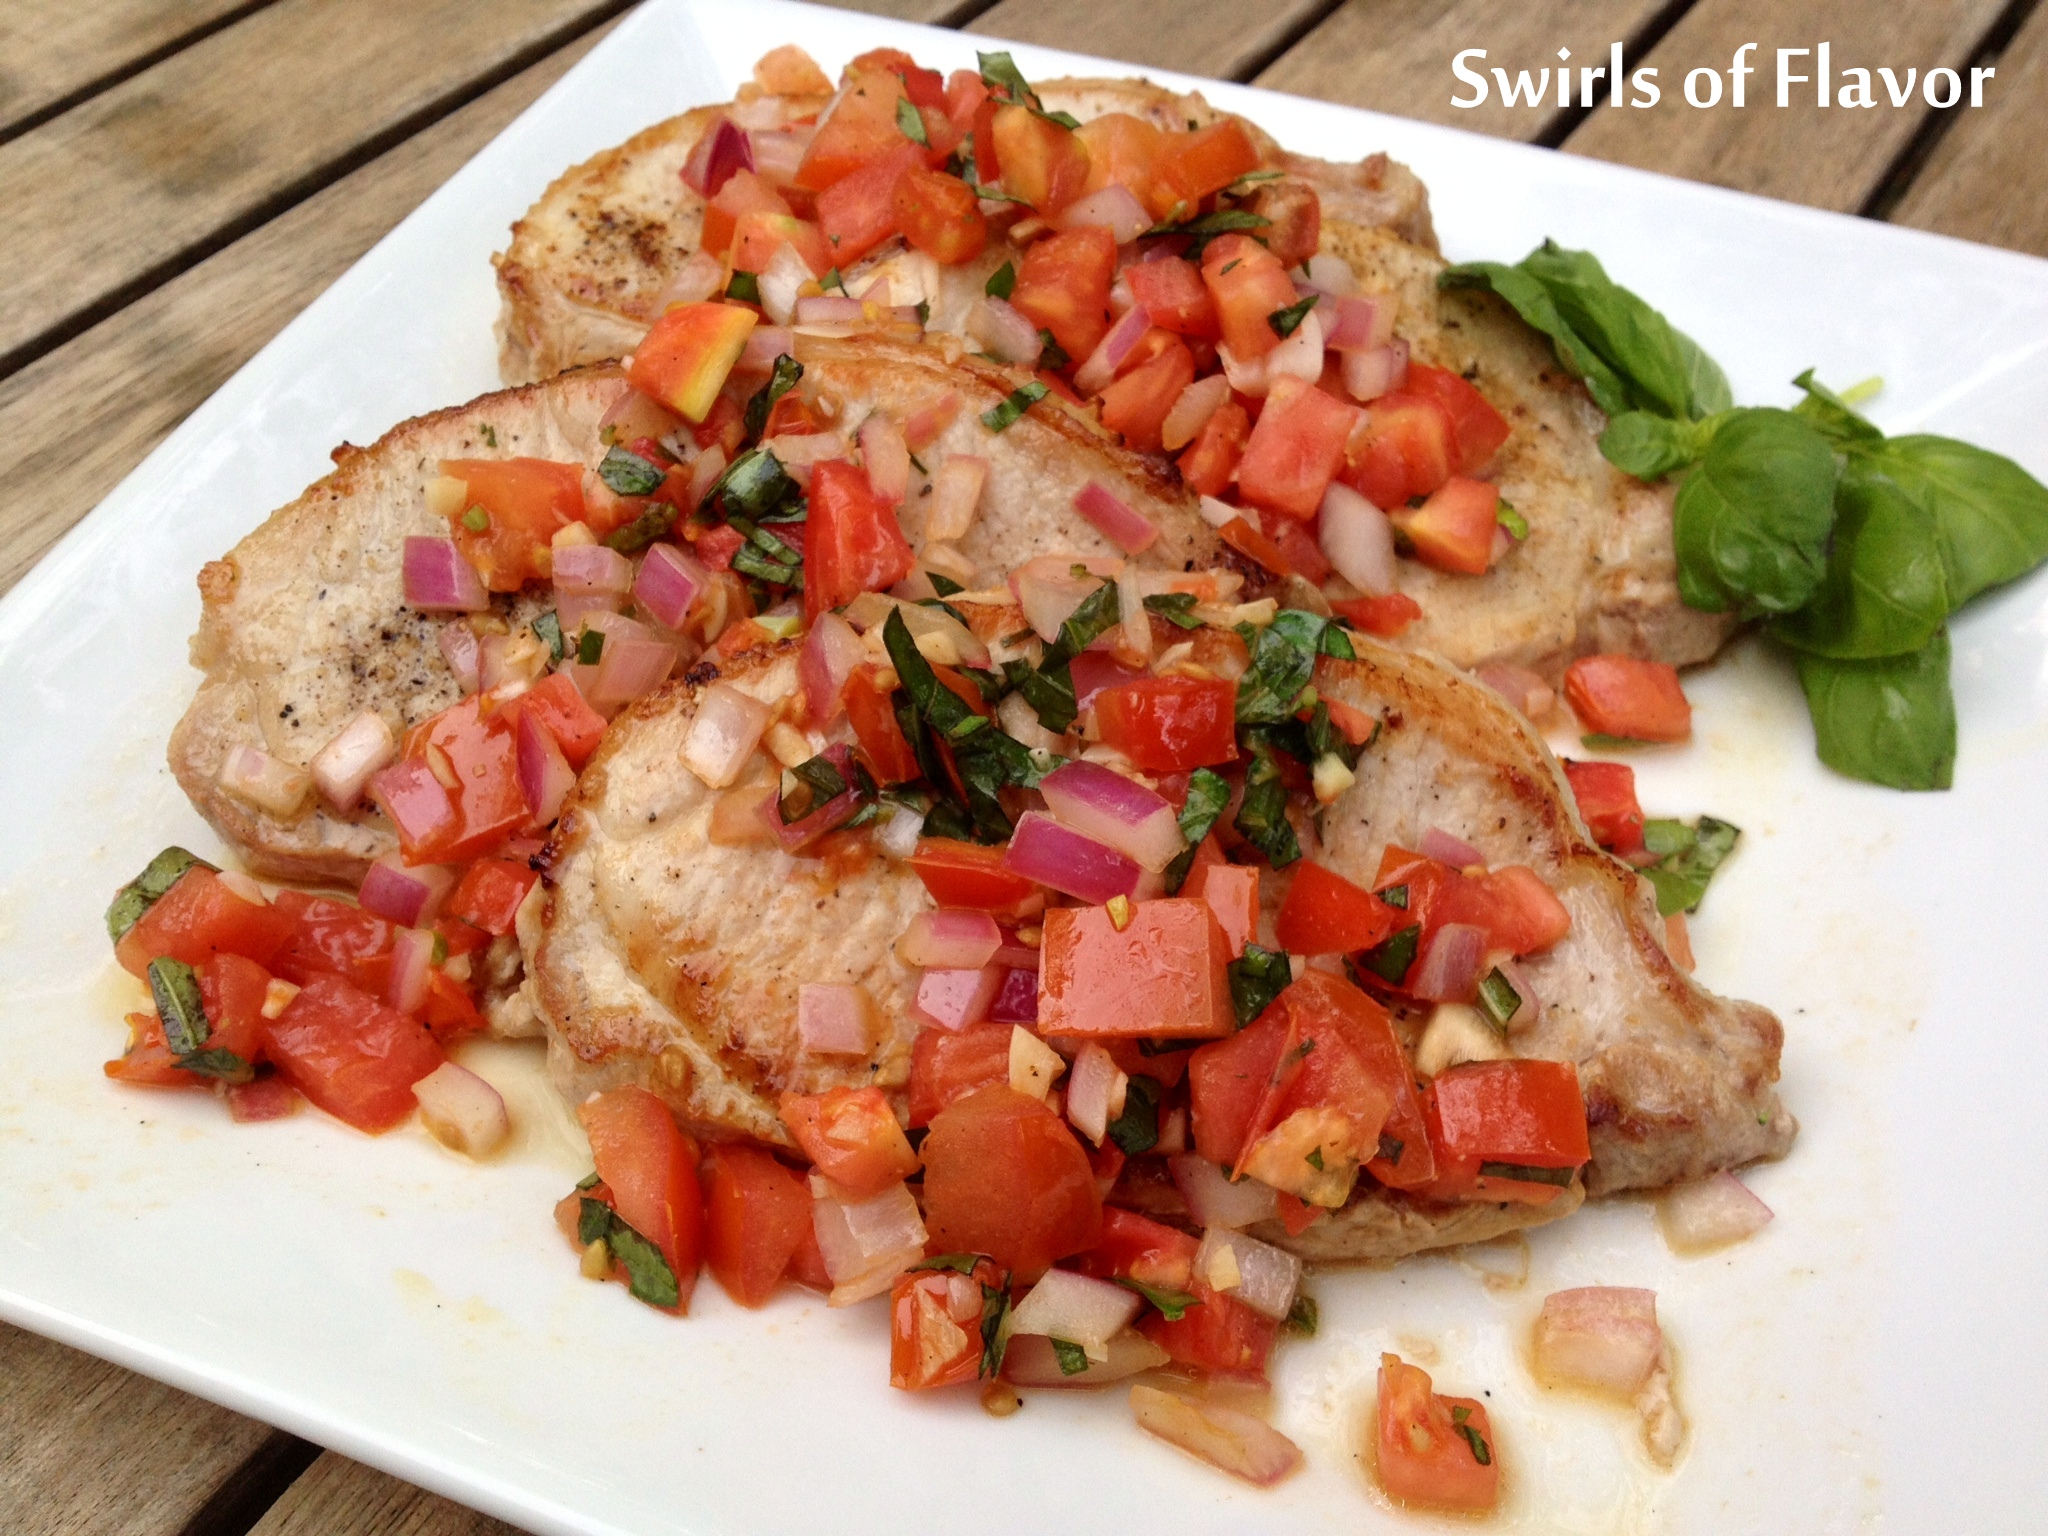 Italian pork chops with bruschetta topping and fresh basil on white plate